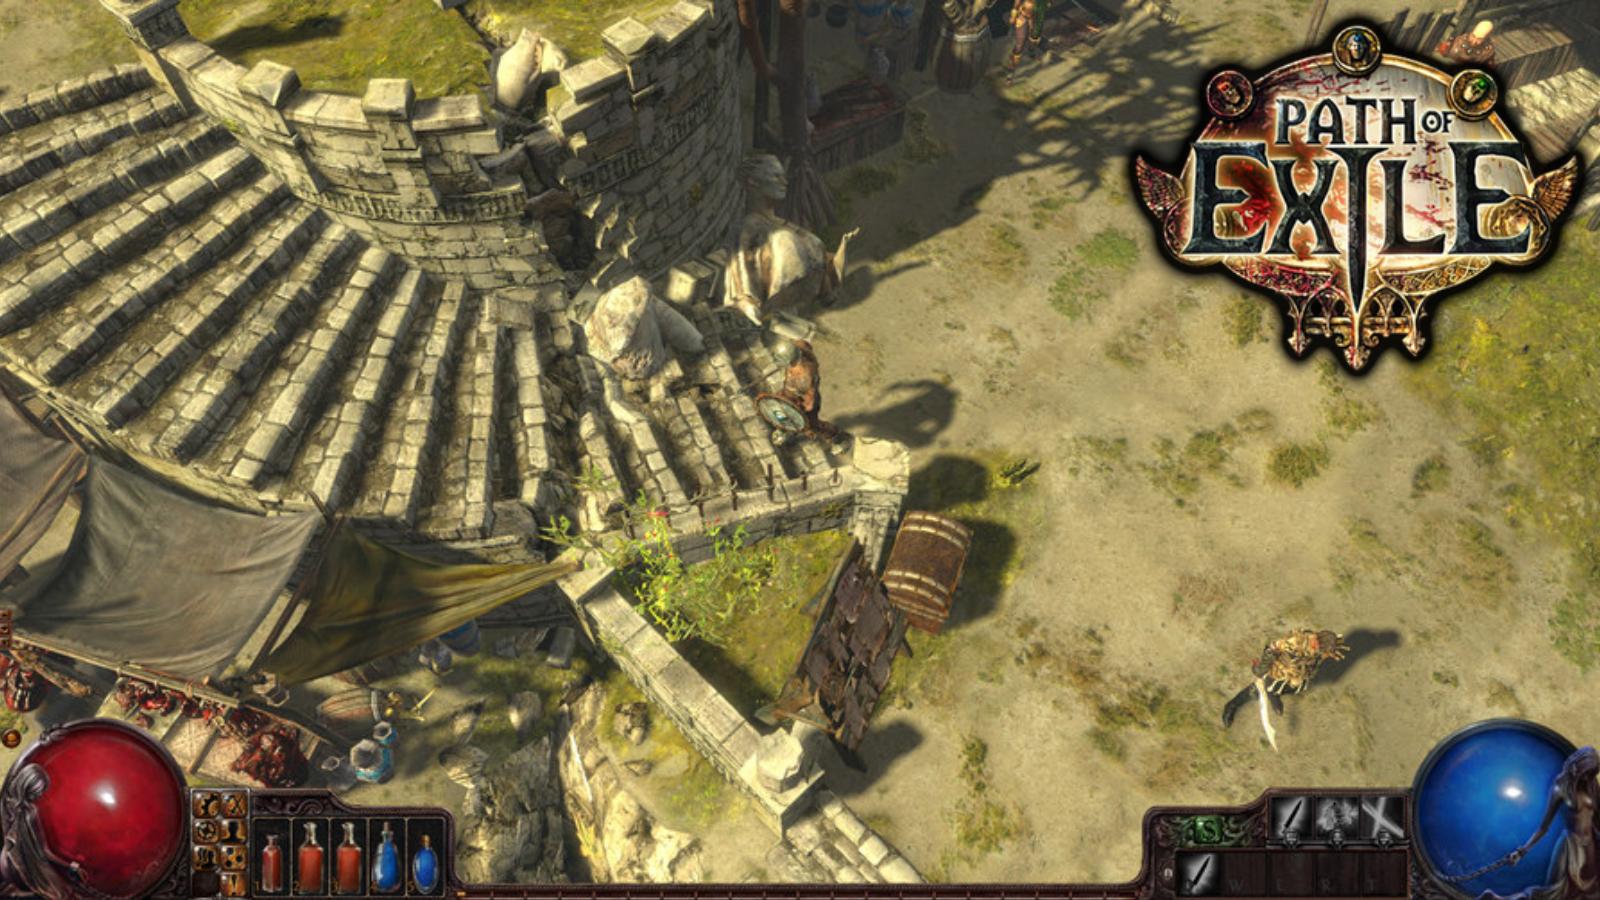 an image of a character in Path of Exile with the game's logo on top right